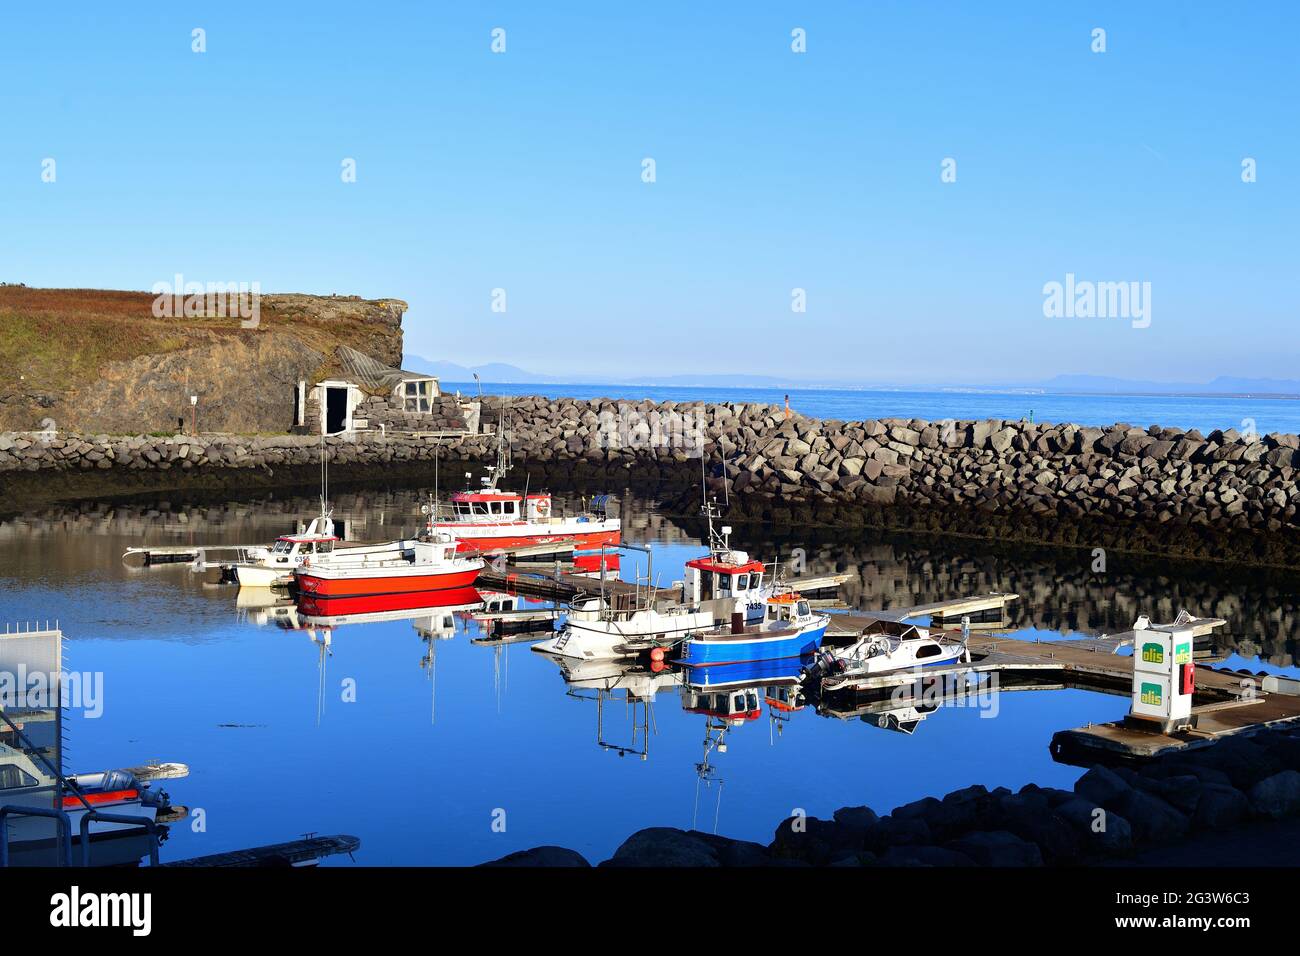 Reykjanesbaer, Iceland. A high, rocky breakwater provides a safe haven from North Atlantic Ocean waters for some fishing boats and small craft. Stock Photo